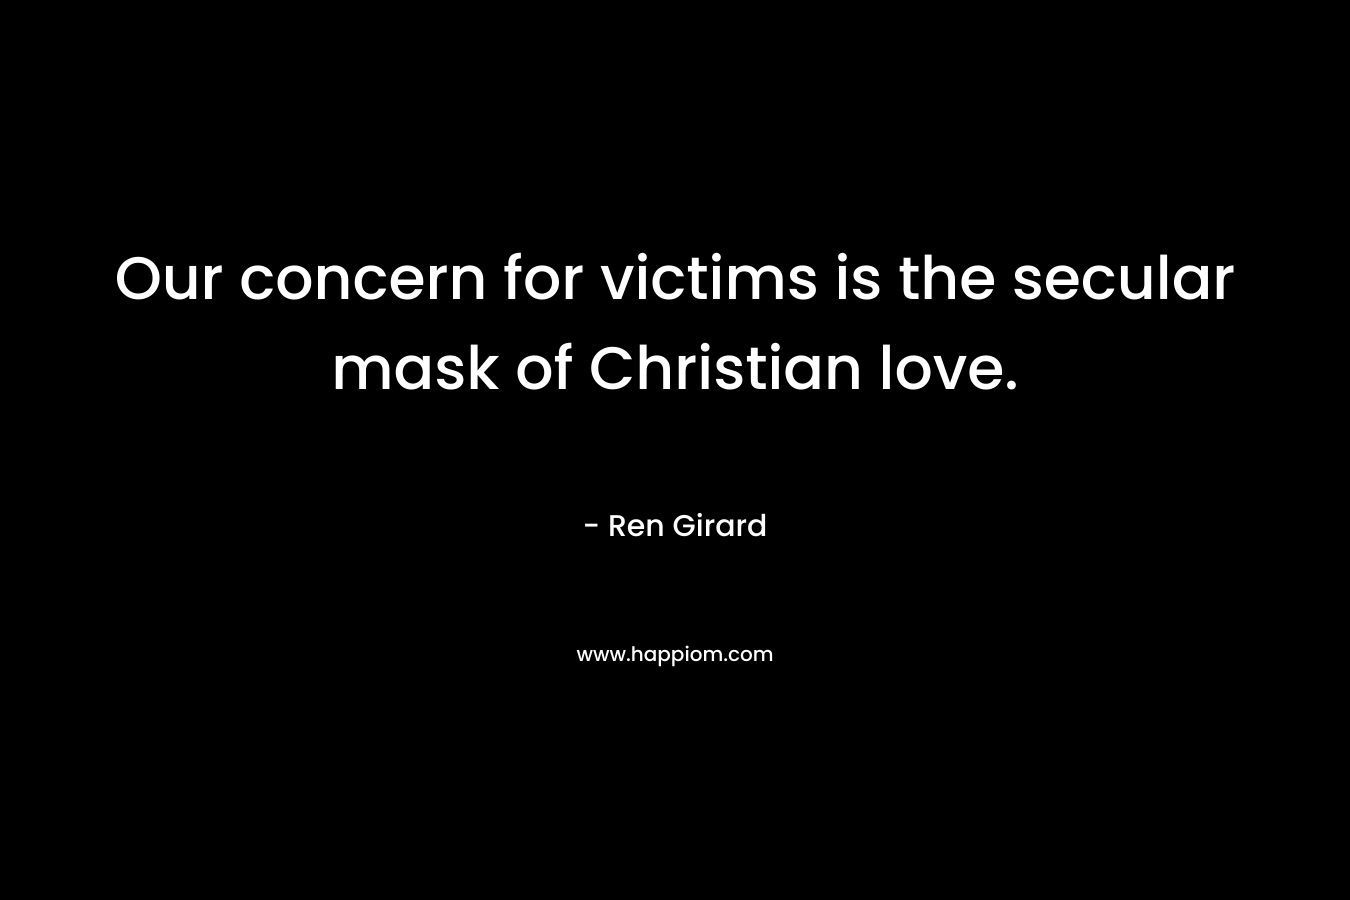 Our concern for victims is the secular mask of Christian love. – Ren Girard